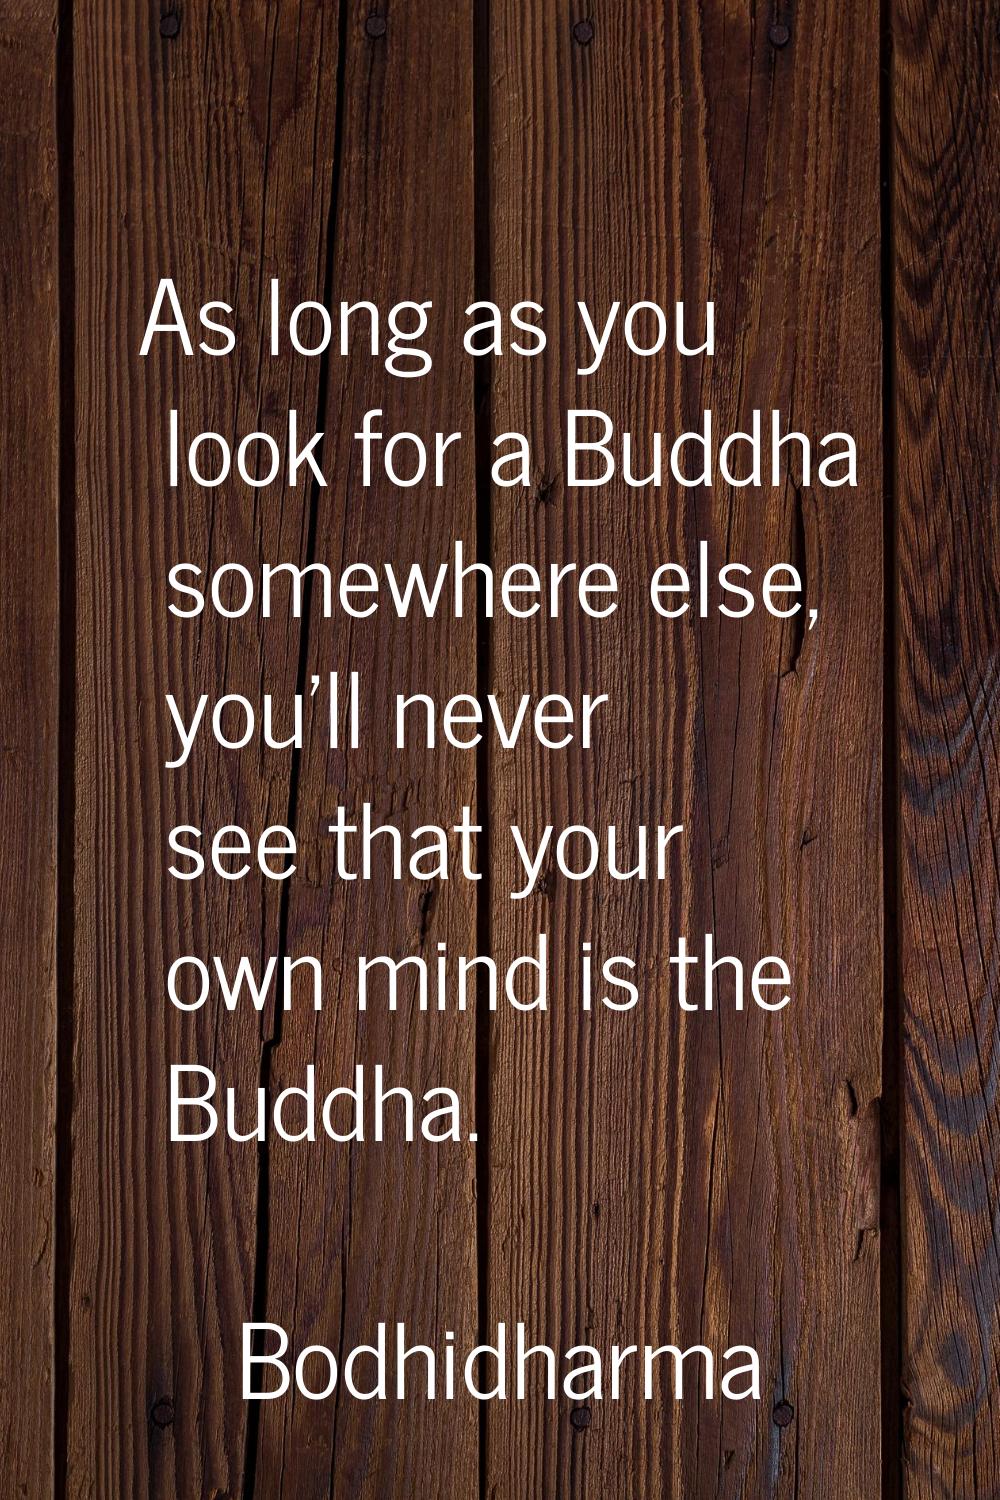 As long as you look for a Buddha somewhere else, you'll never see that your own mind is the Buddha.